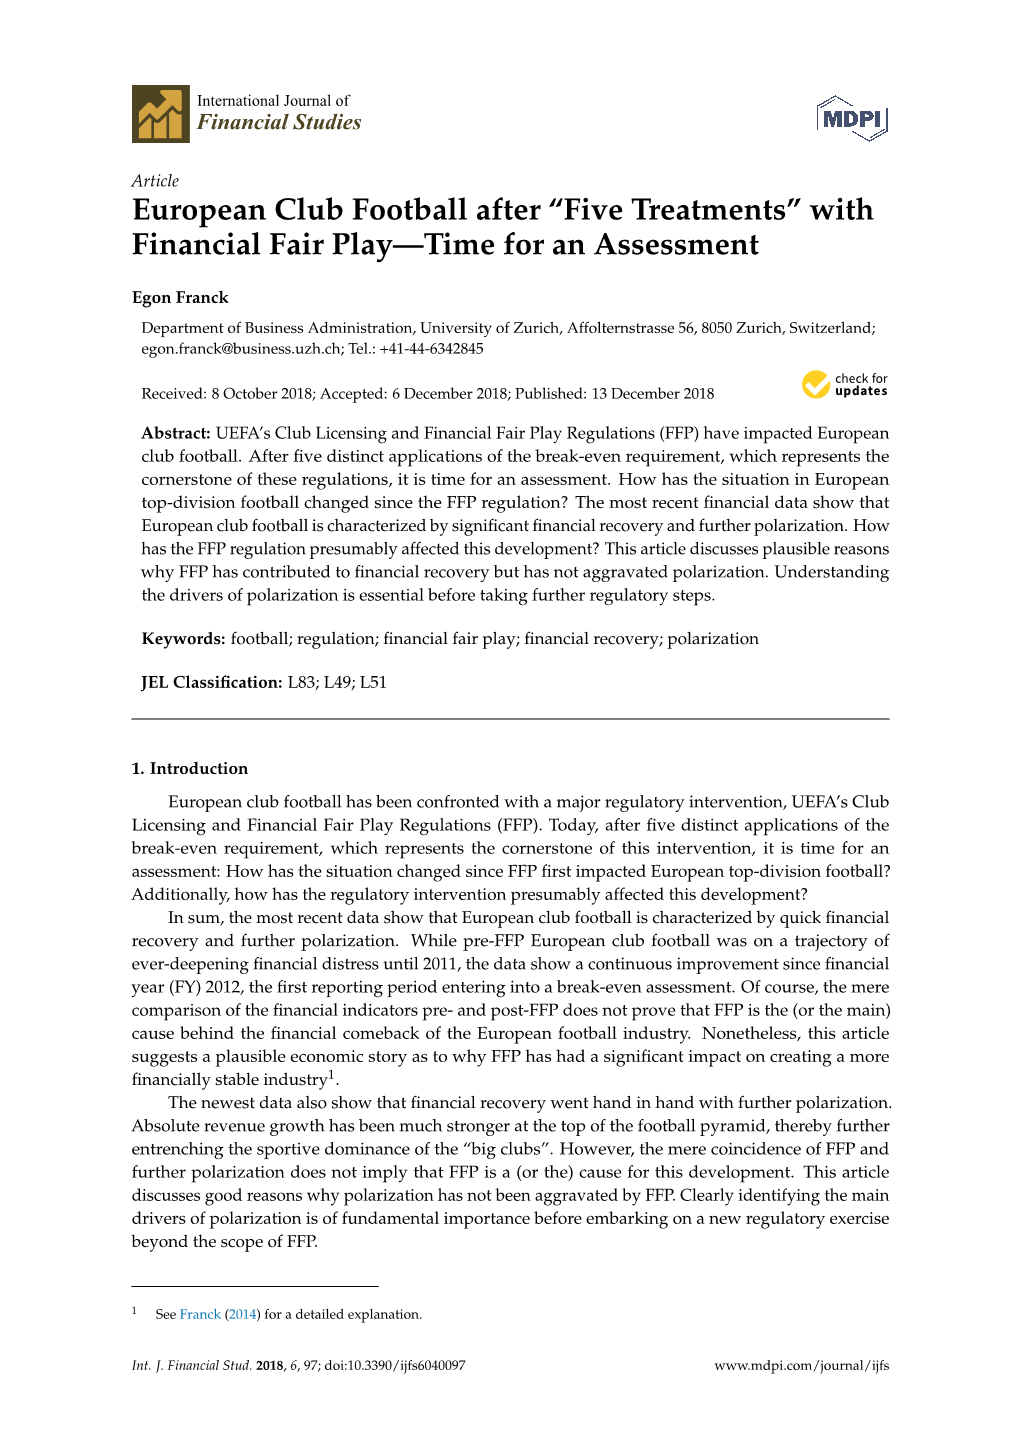 With Financial Fair Play—Time for an Assessment